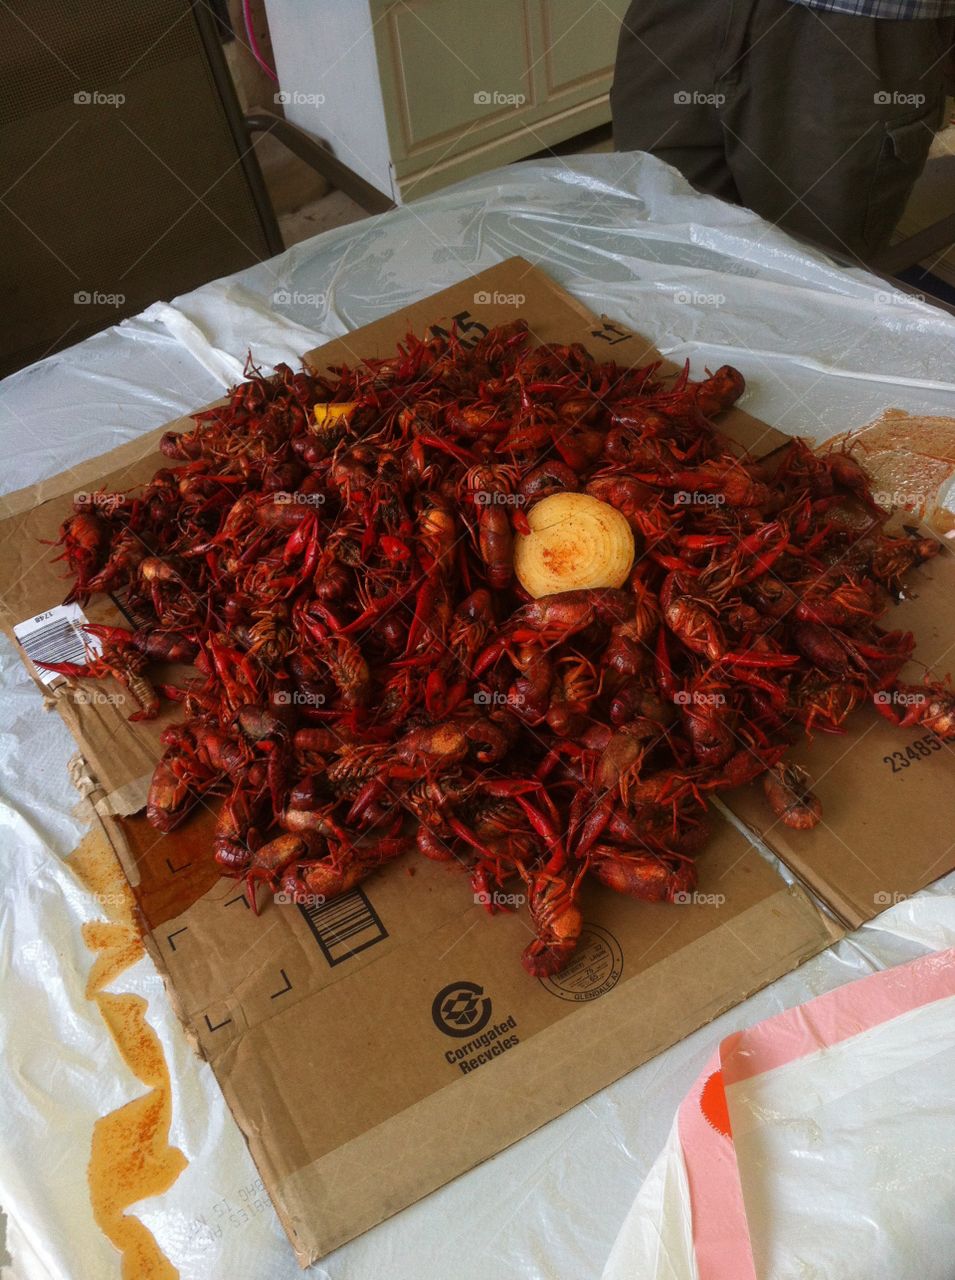 Let there be Crawfish